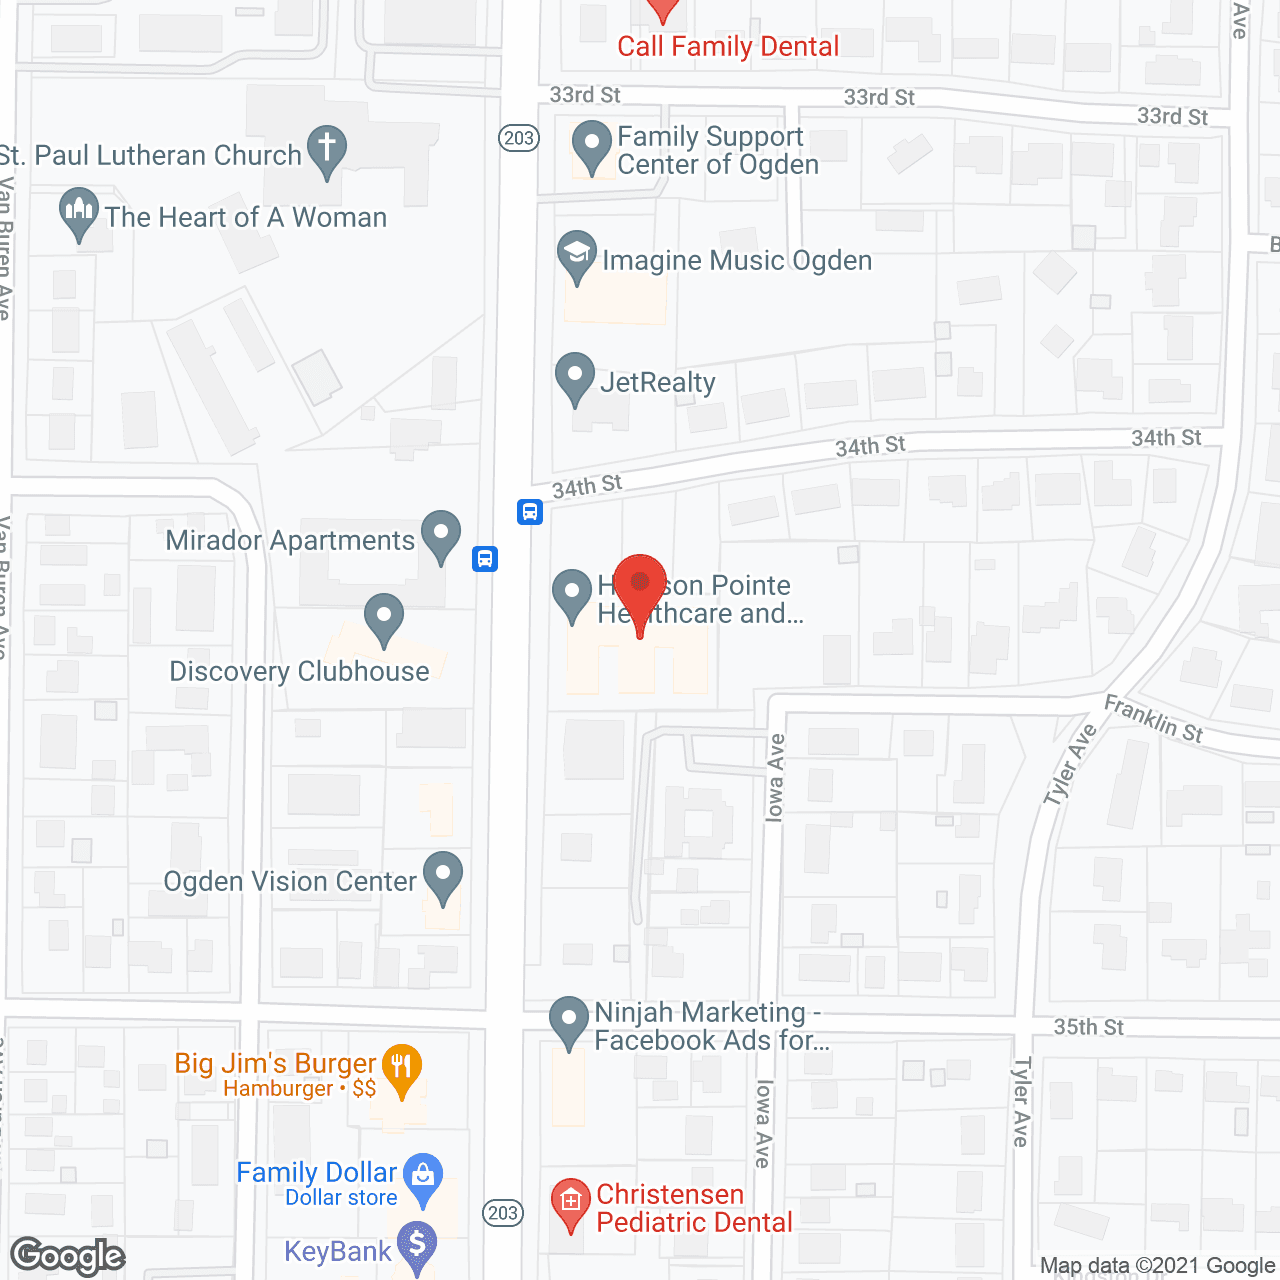 Harrison Pointe Healthcare and Rehab in google map